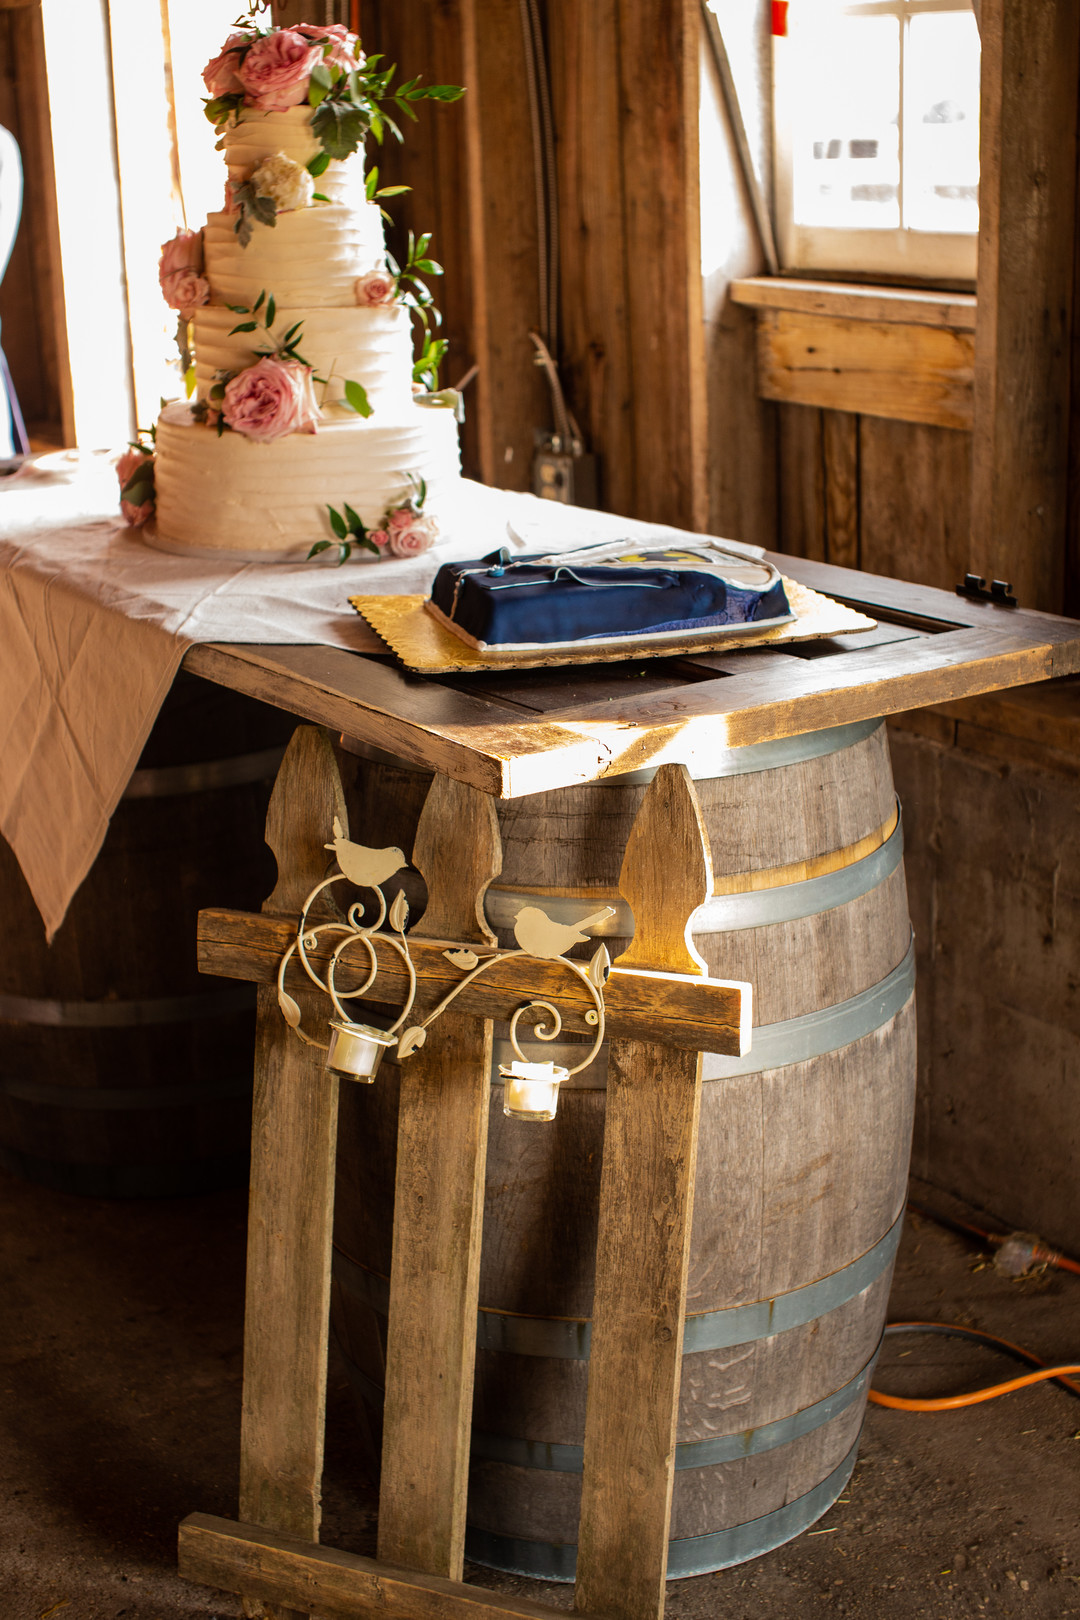 Barn wedding in Rock Falls, IL captured by Rick Jennisch Photography. Find more wedding inspiration at CHItheeWED.com! 